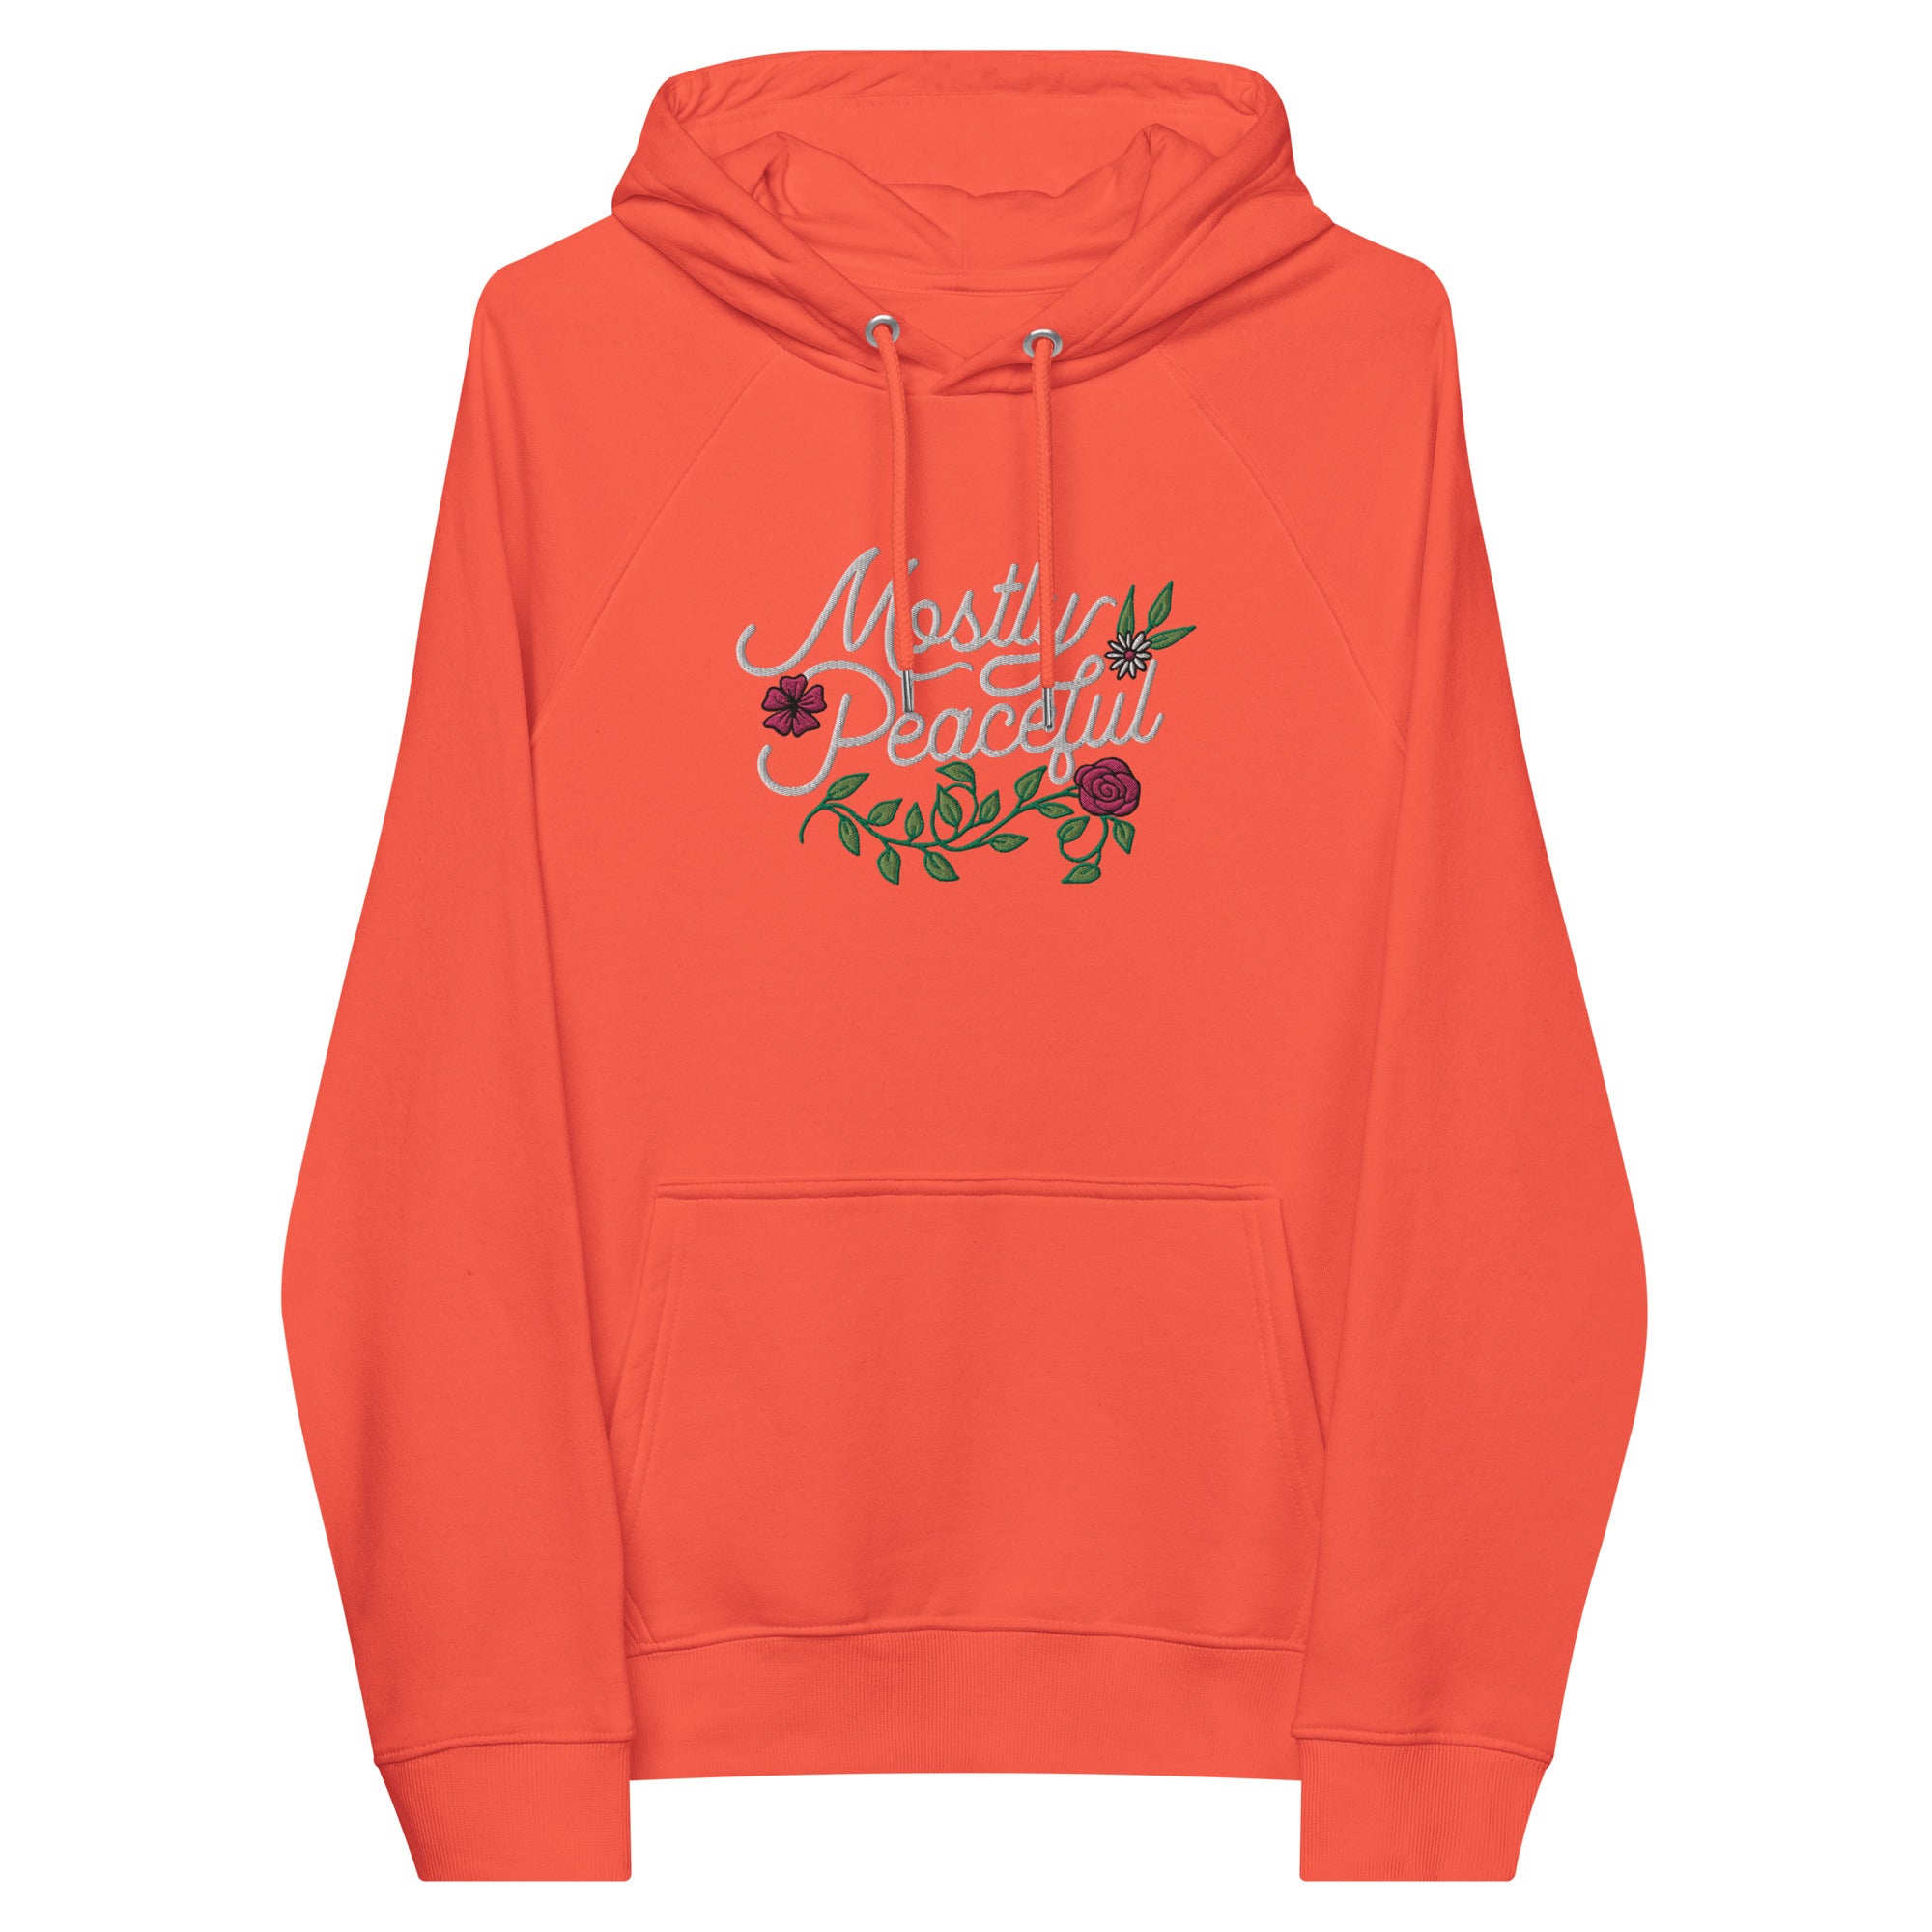 Mostely Peaceful Eco Raglan Embroidered Hoodie